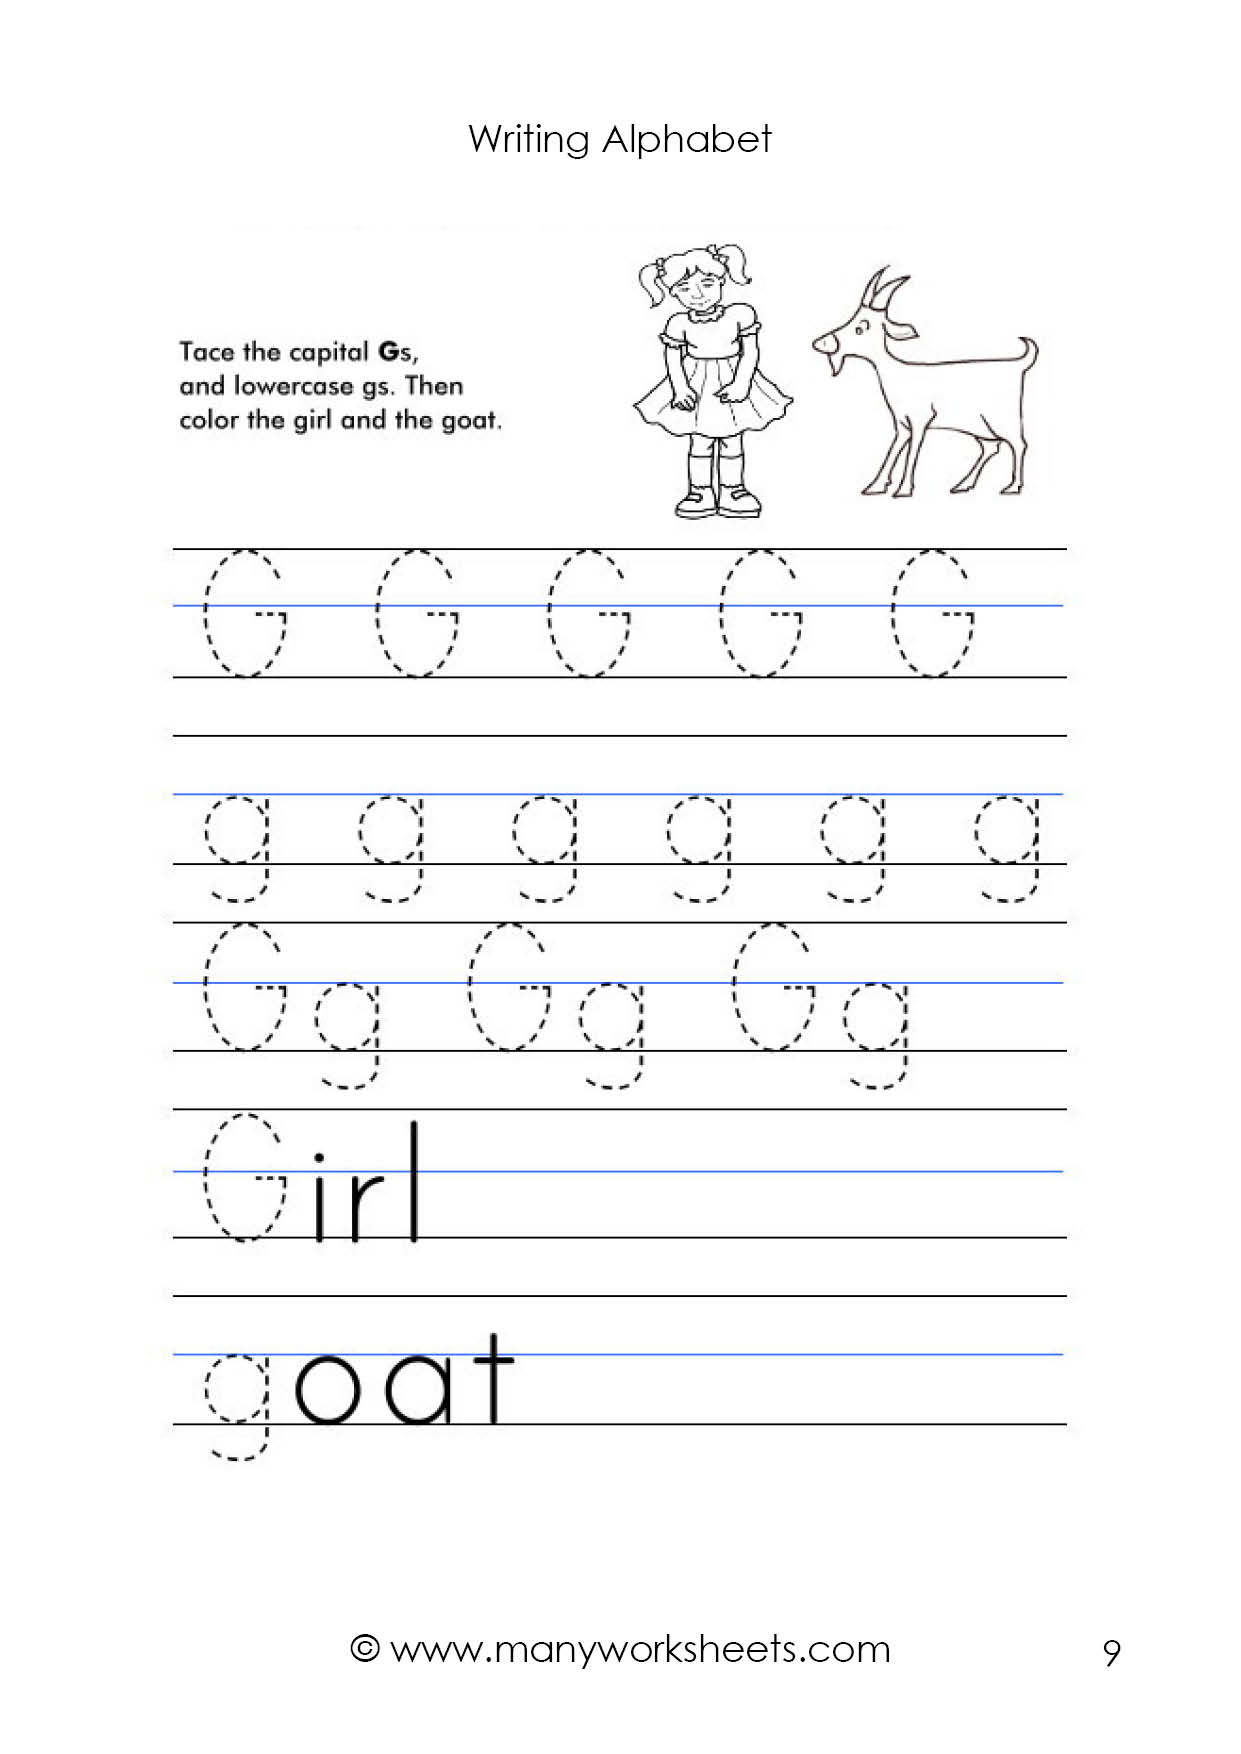 Letter G Worksheet – Tracing And Handwriting with Upper And Lowercase Alphabet Tracing